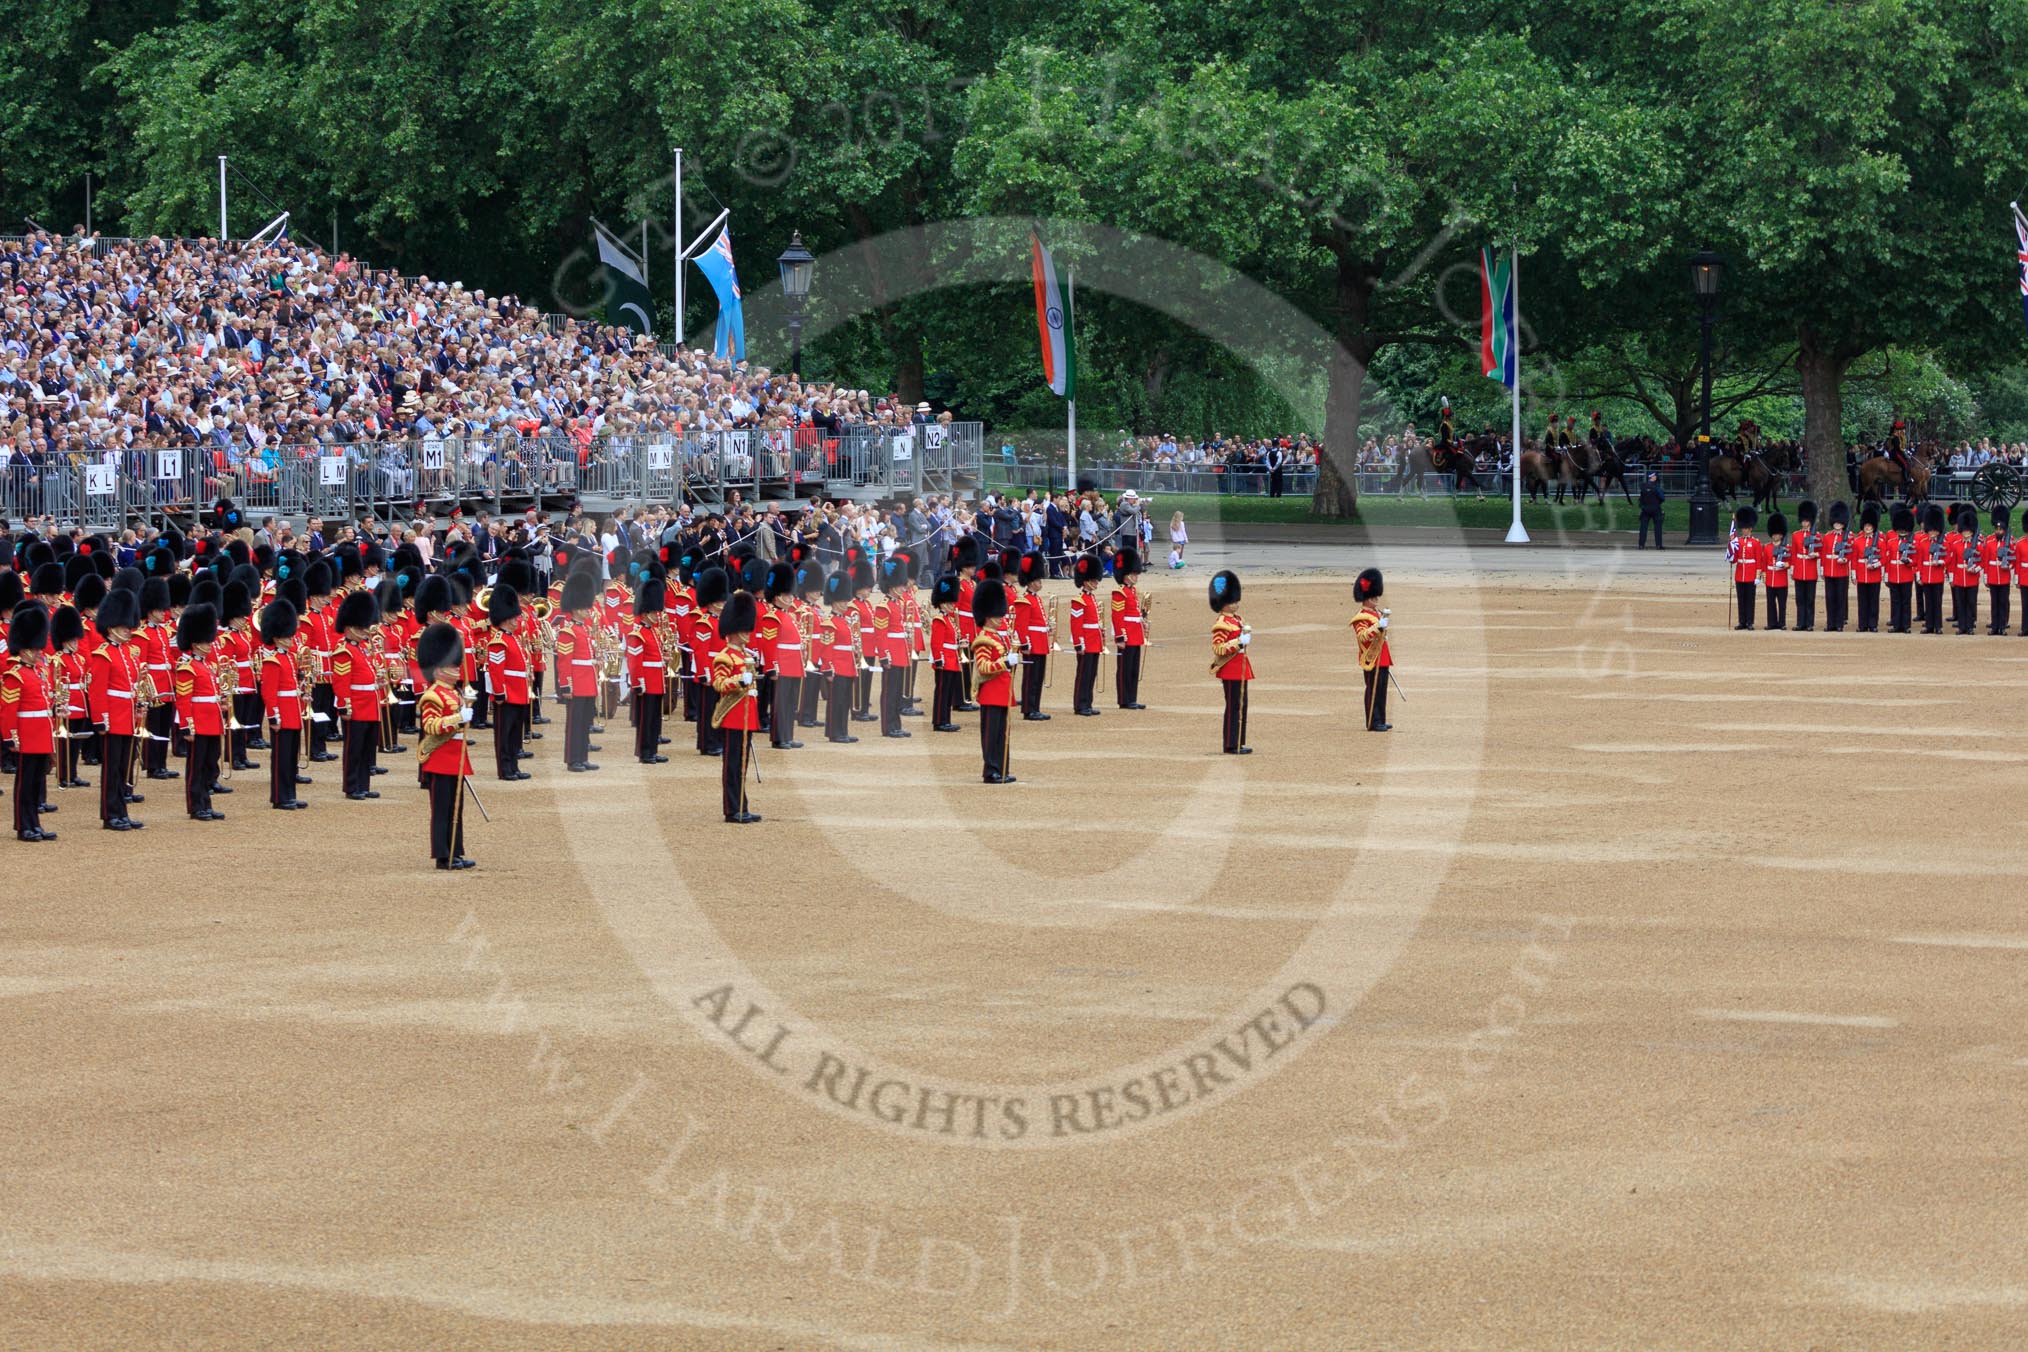 during The Colonel's Review {iptcyear4} (final rehearsal for Trooping the Colour, The Queen's Birthday Parade)  at Horse Guards Parade, Westminster, London, 2 June 2018, 10:39.